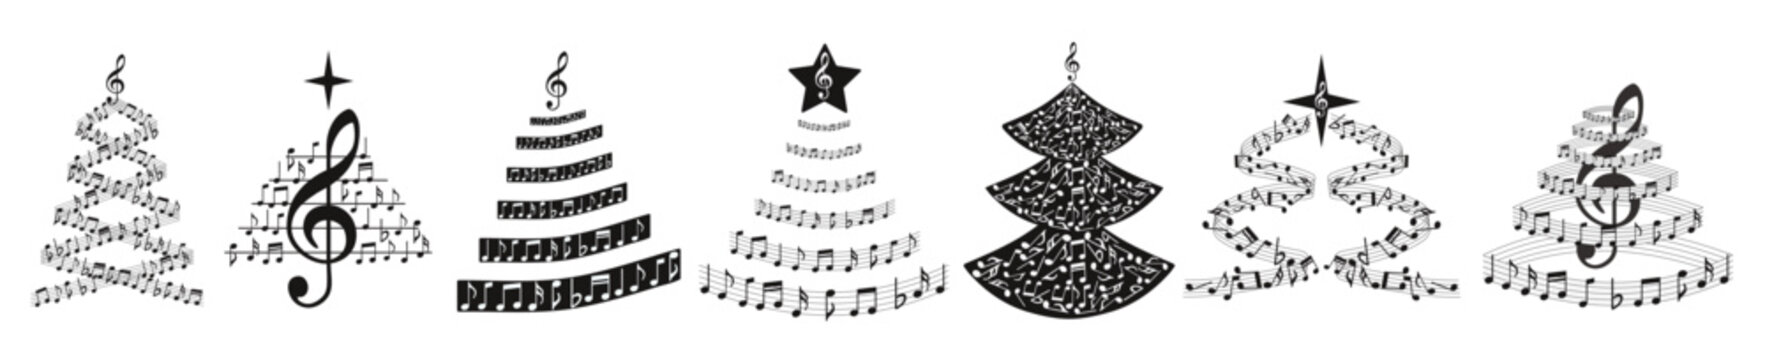 Set of Christmas trees made of music note signs on white background